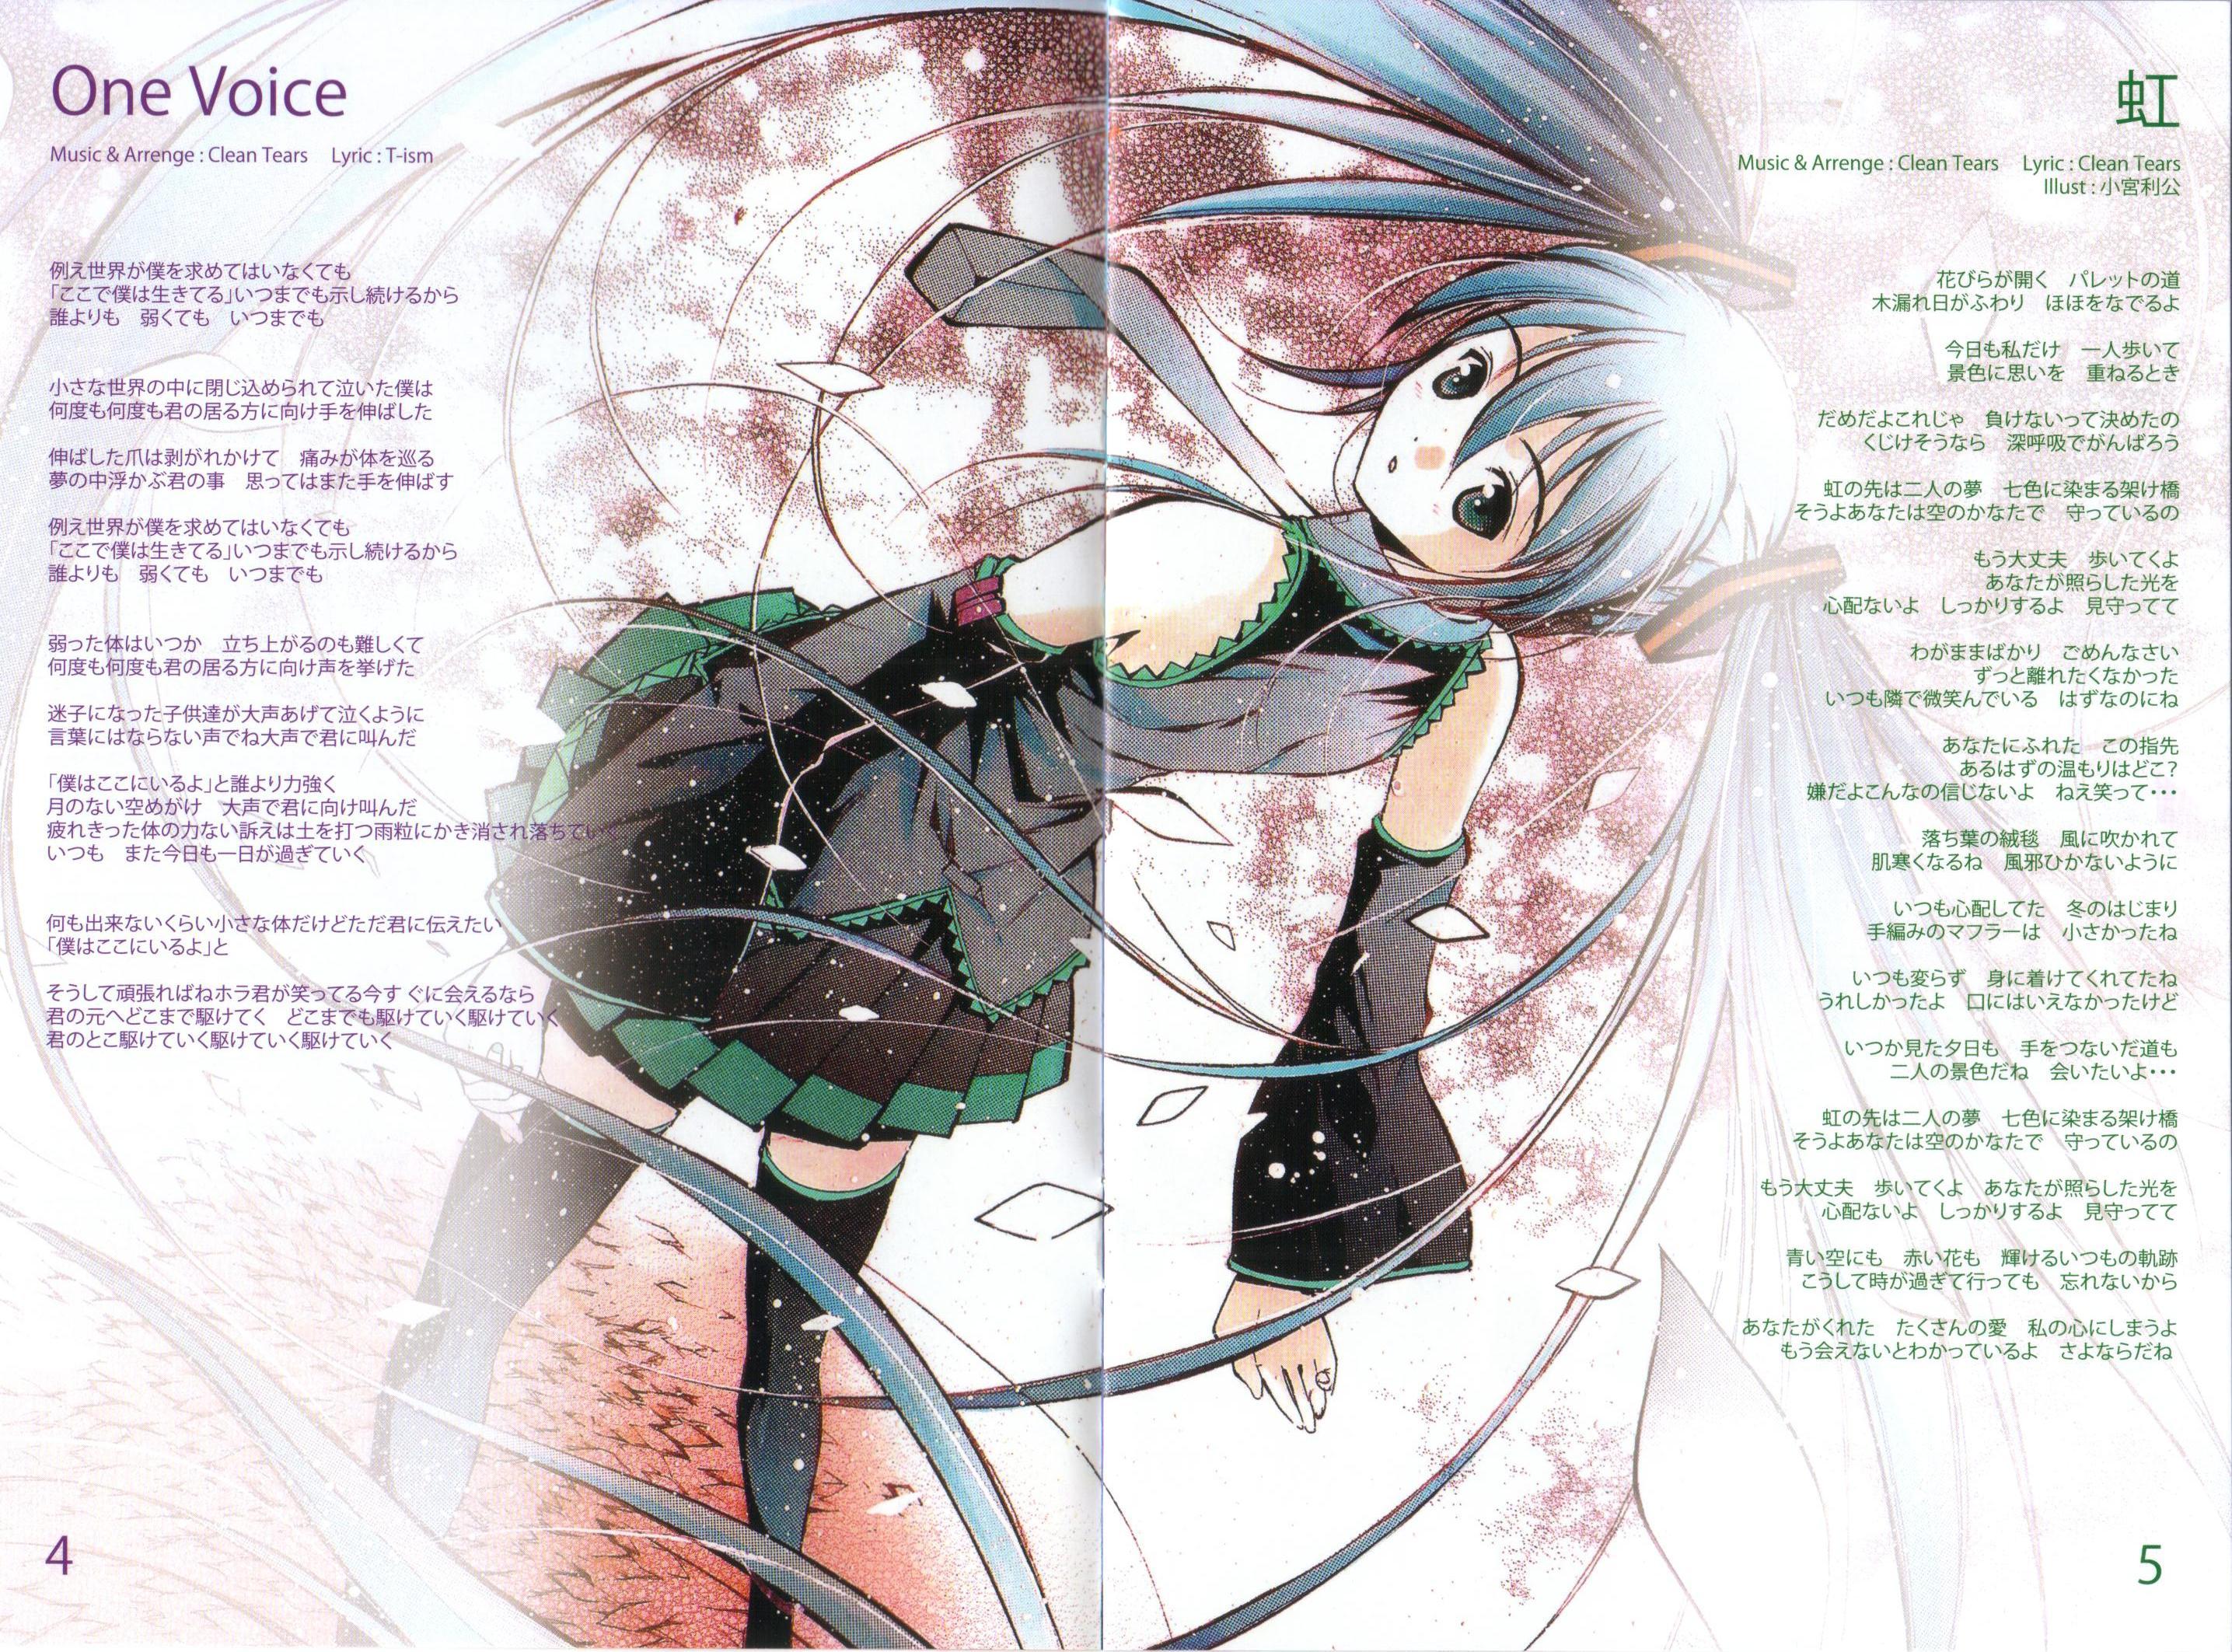 Love it! - Clean Tears, S.C.X feat. 初音ミク - Vocaloid Database